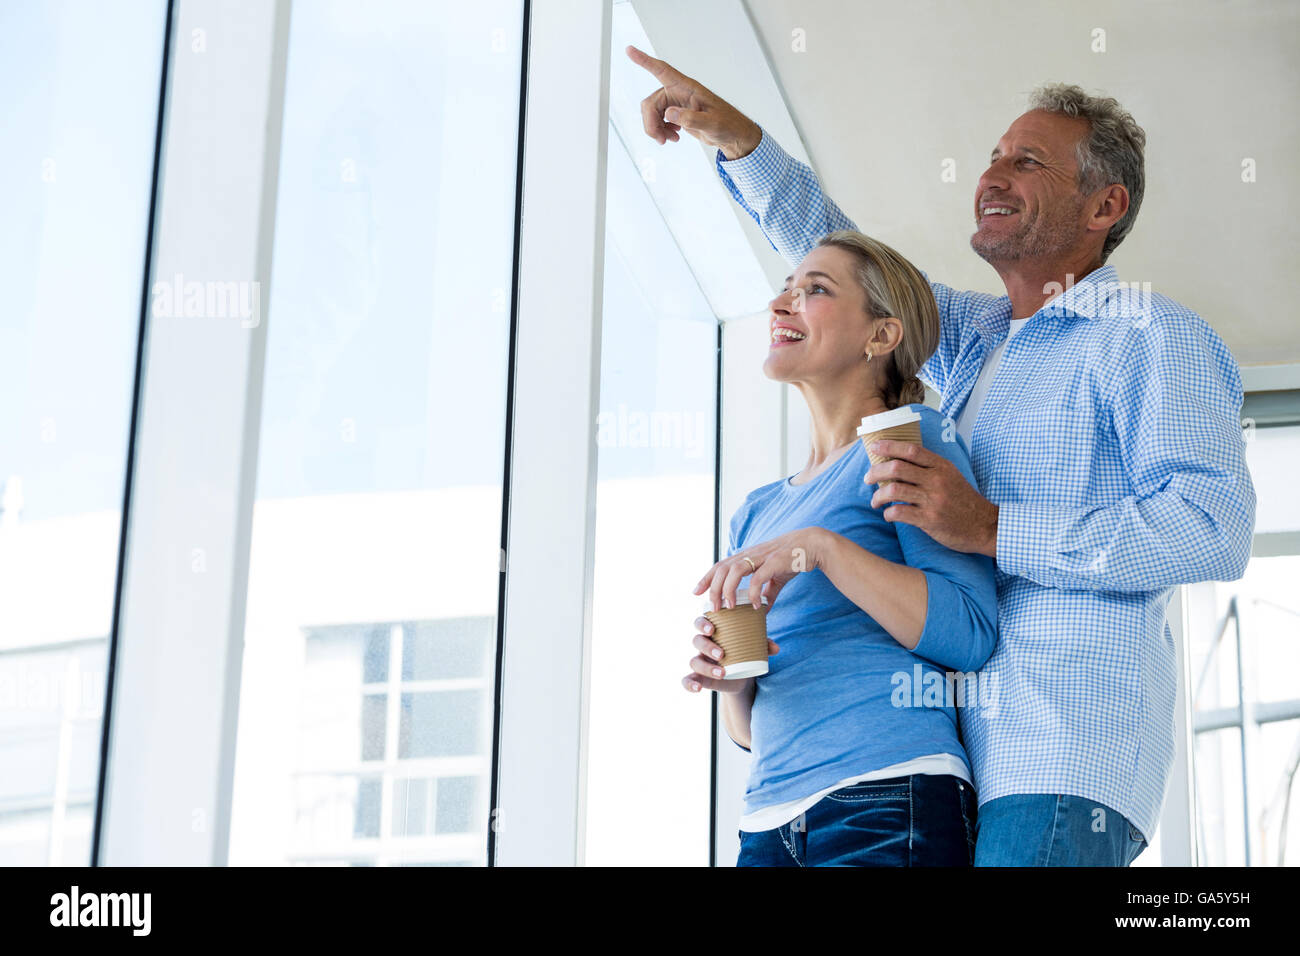 Smiling man pointing while standing by woman Stock Photo